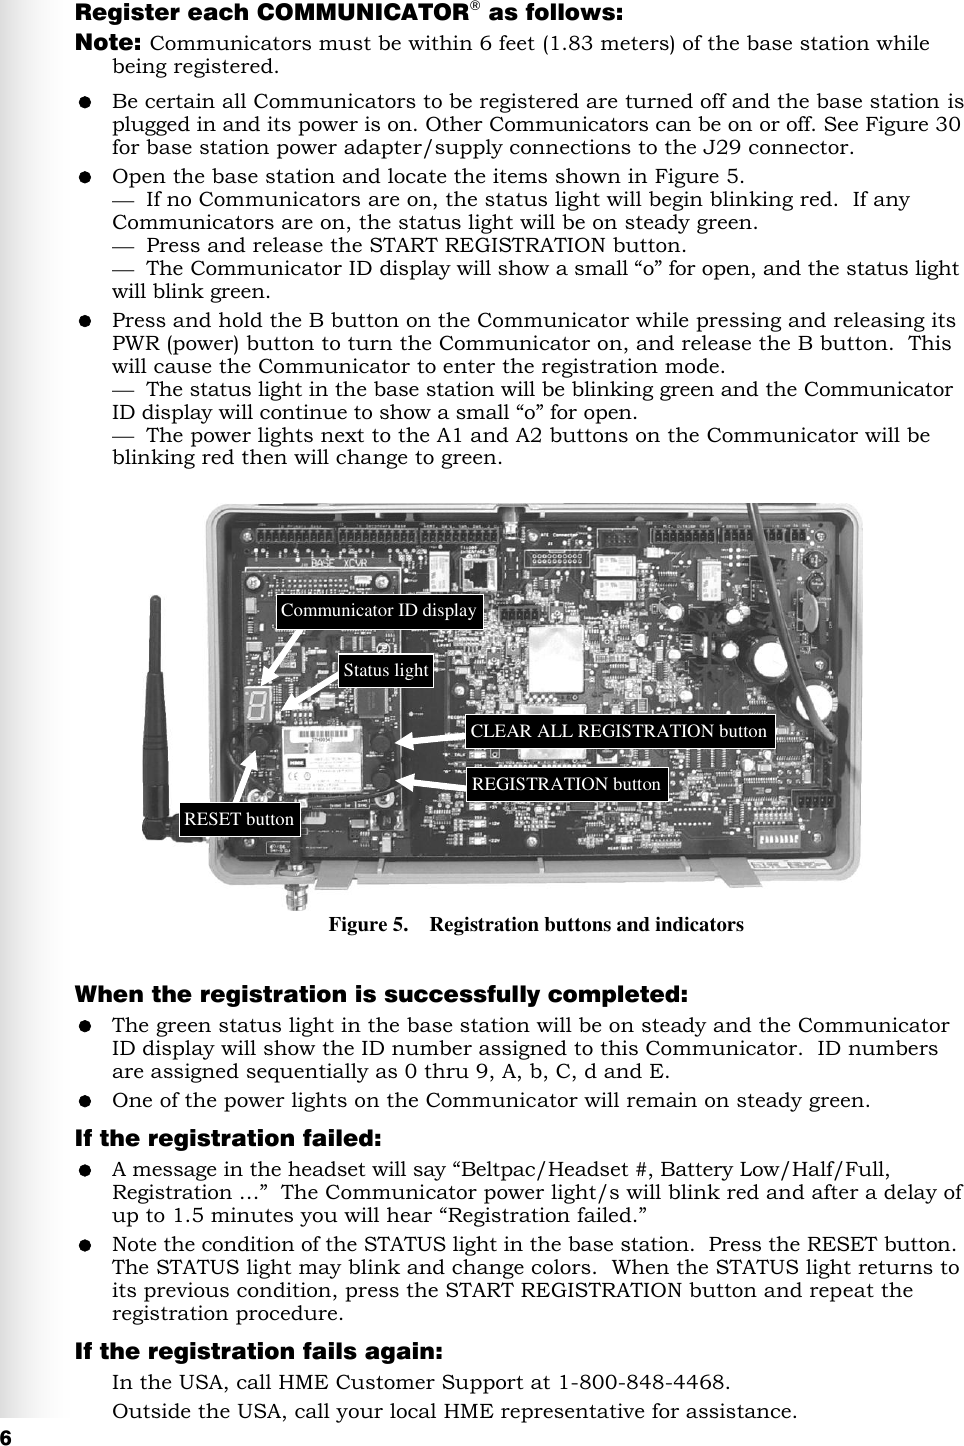   6 Register each COMMUNICATOR® as follows: Note:  Communicators must be within 6 feet (1.83 meters) of the base station while being registered.  Be certain all Communicators to be registered are turned off and the base station is plugged in and its power is on. Other Communicators can be on or off. See Figure 30 for base station power adapter/supply connections to the J29 connector.  Open the base station and locate the items shown in Figure 5.    If no Communicators are on, the status light will begin blinking red.  If any Communicators are on, the status light will be on steady green.   Press and release the START REGISTRATION button.    The Communicator ID display will show a small “o” for open, and the status light will blink green.  Press and hold the B button on the Communicator while pressing and releasing its PWR (power) button to turn the Communicator on, and release the B button.  This will cause the Communicator to enter the registration mode.    The status light in the base station will be blinking green and the Communicator ID display will continue to show a small “o” for open.    The power lights next to the A1 and A2 buttons on the Communicator will be blinking red then will change to green.               When the registration is successfully completed:  The green status light in the base station will be on steady and the Communicator ID display will show the ID number assigned to this Communicator.  ID numbers are assigned sequentially as 0 thru 9, A, b, C, d and E.  One of the power lights on the Communicator will remain on steady green.  If the registration failed:  A message in the headset will say “Beltpac/Headset #, Battery Low/Half/Full, Registration …”  The Communicator power light/s will blink red and after a delay of up to 1.5 minutes you will hear “Registration failed.”  Note the condition of the STATUS light in the base station.  Press the RESET button.  The STATUS light may blink and change colors.  When the STATUS light returns to its previous condition, press the START REGISTRATION button and repeat the registration procedure. If the registration fails again: In the USA, call HME Customer Support at 1-800-848-4468. Outside the USA, call your local HME representative for assistance. Figure 5.    Registration buttons and indicators Communicator ID display Status light RESET button CLEAR ALL REGISTRATION button REGISTRATION button 